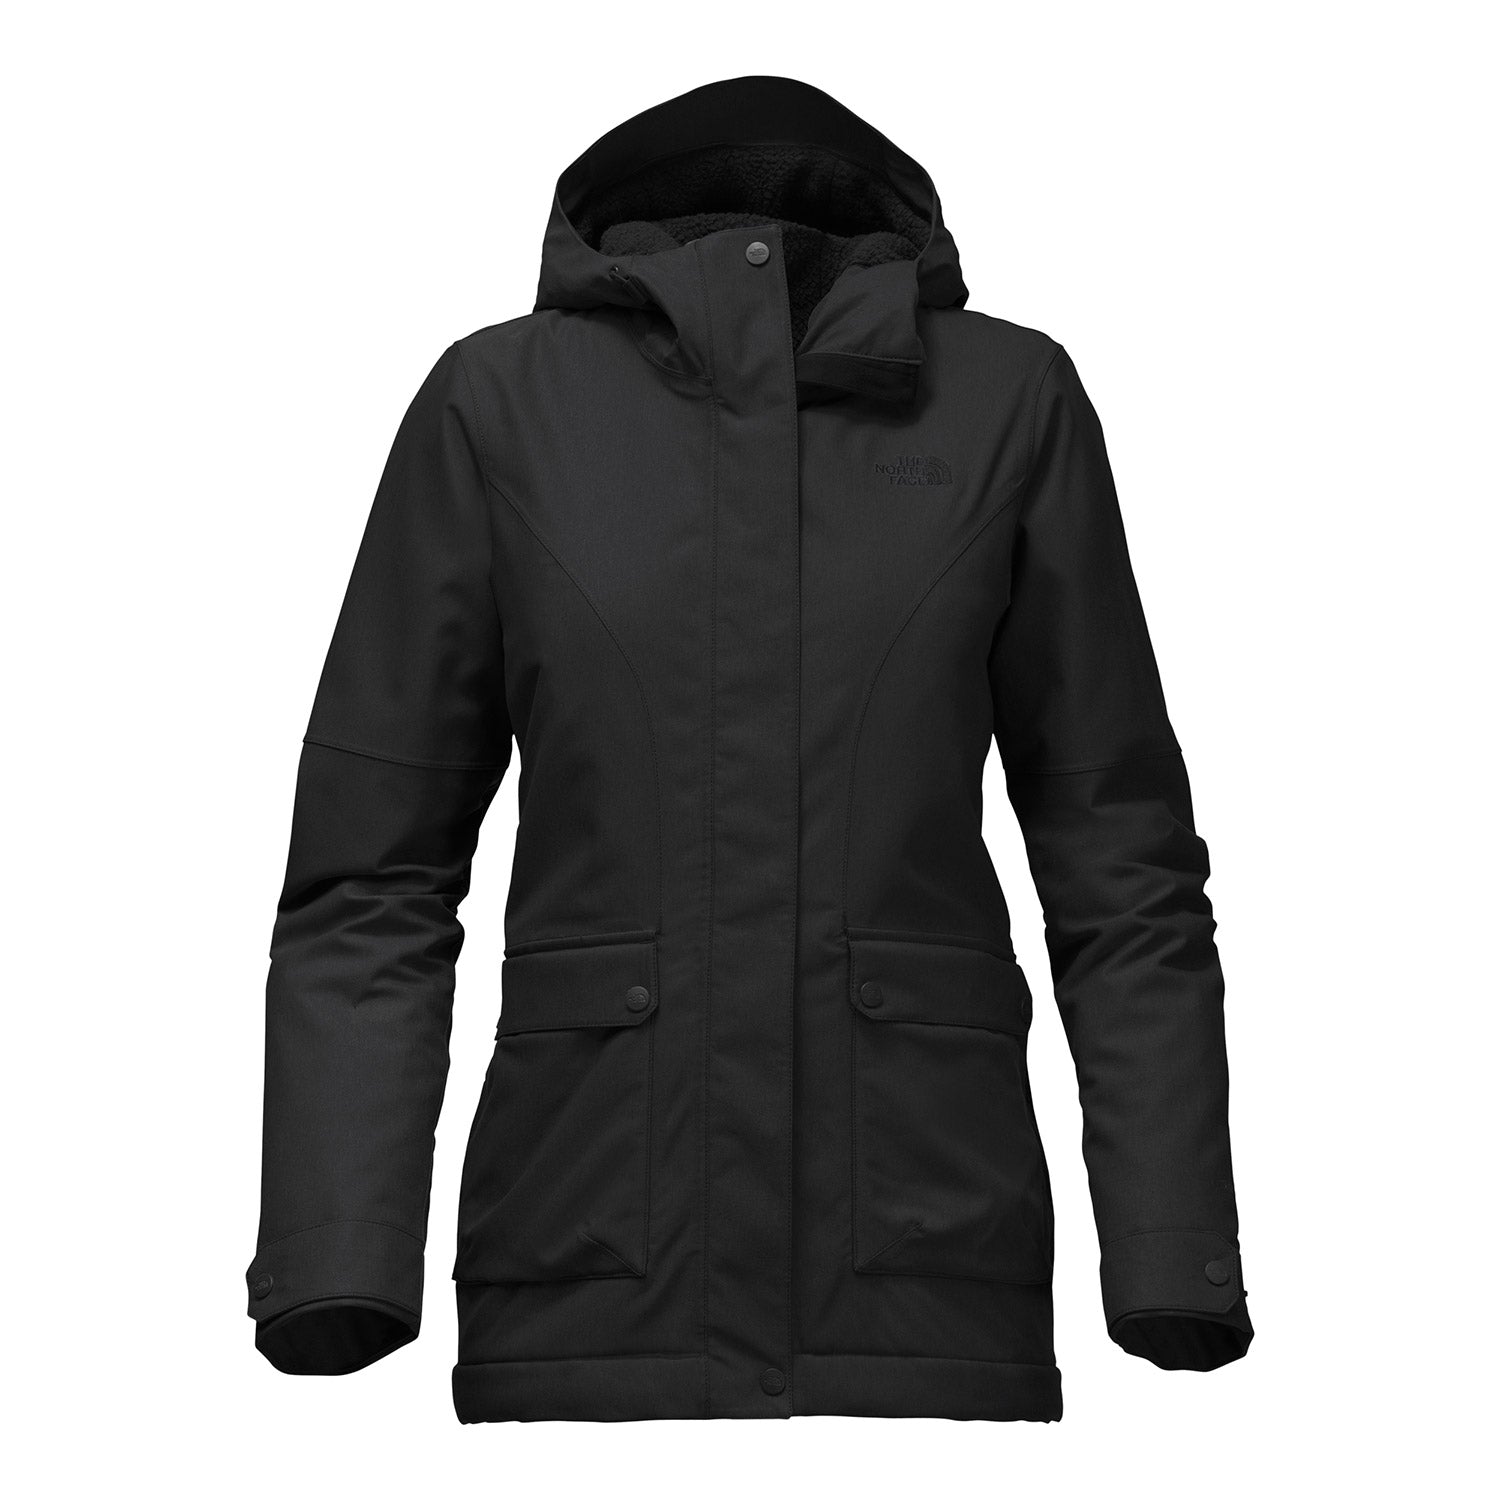 Firesyde Insulated Jacket | Altitude Sports